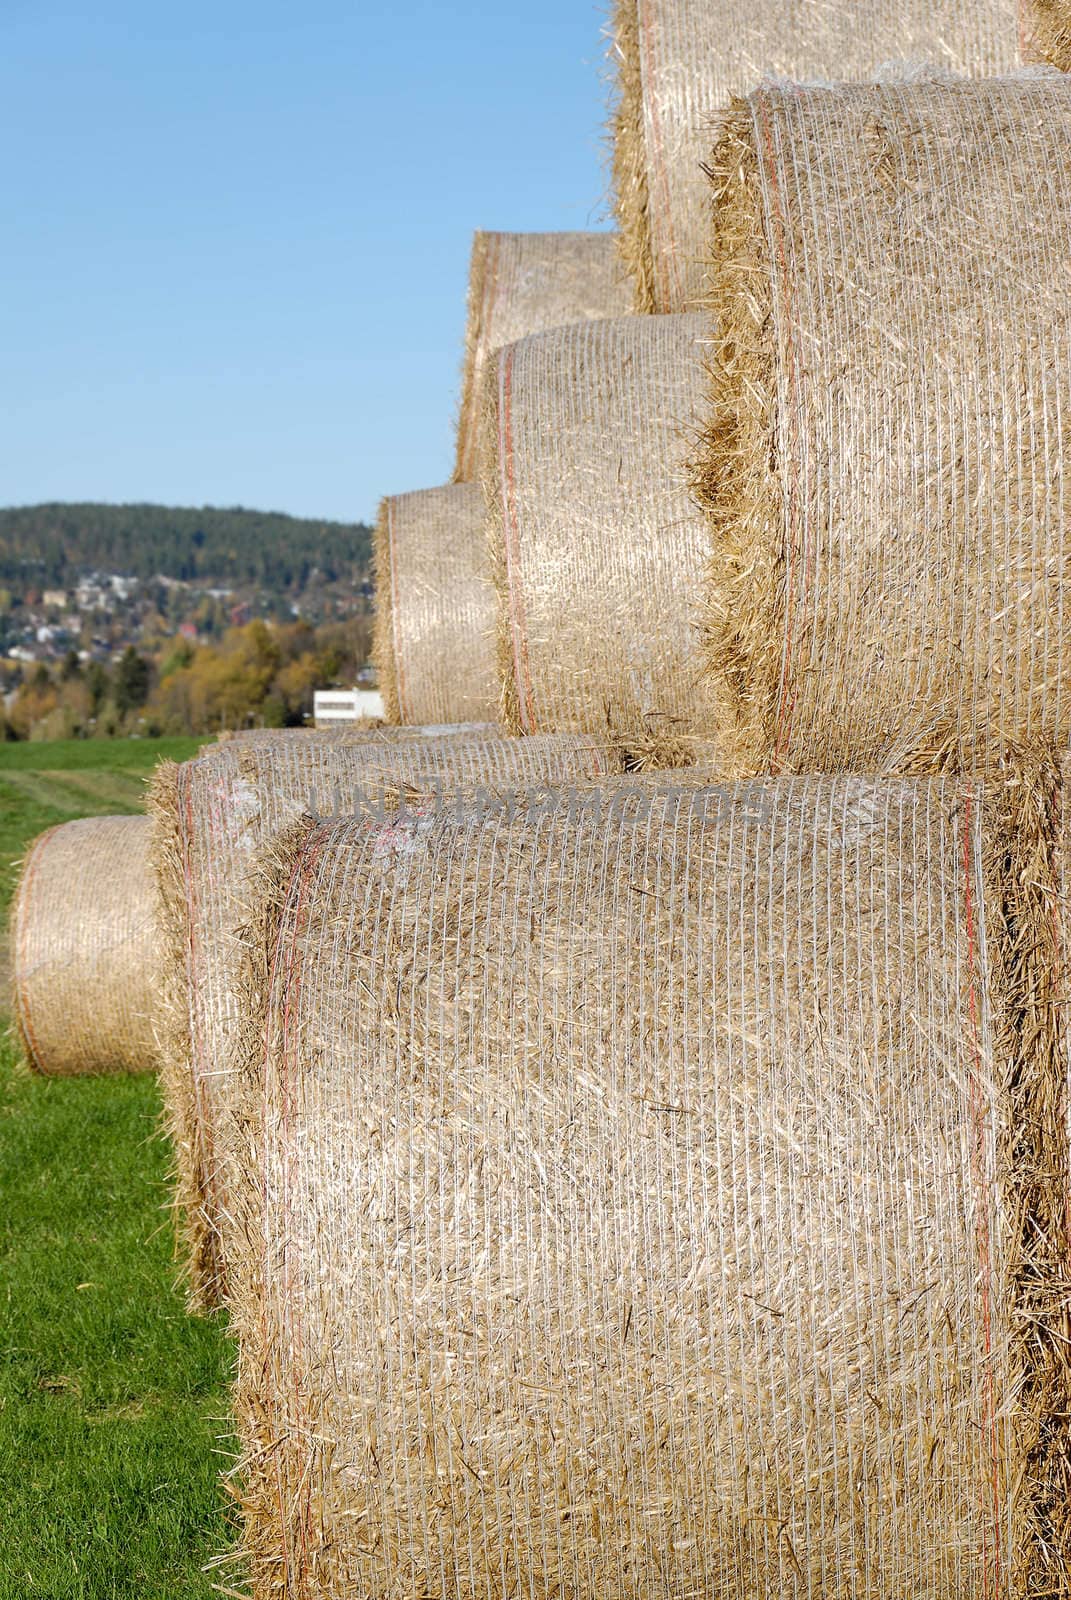 A pyramid of hay bails, seen from side.
